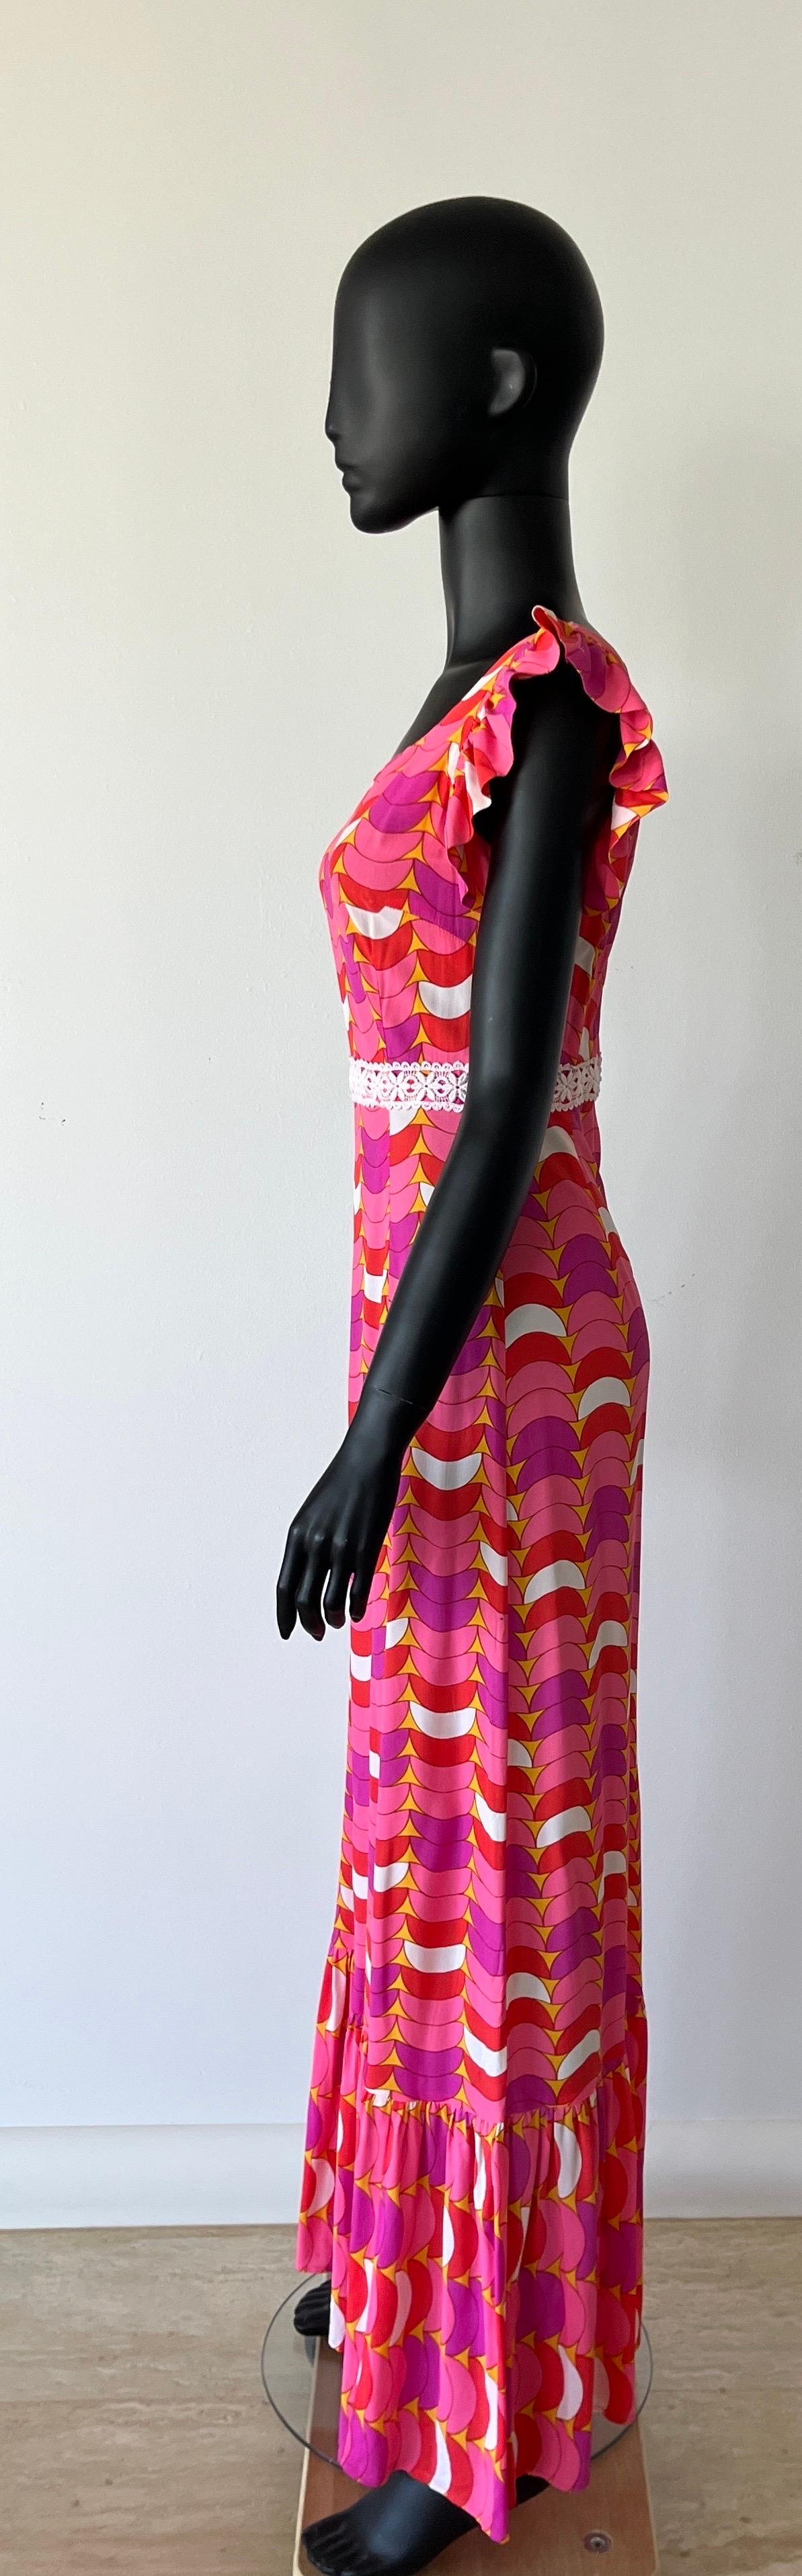 A spectacular vintage 1970’s patterned long evening dress with lace detail and f 2